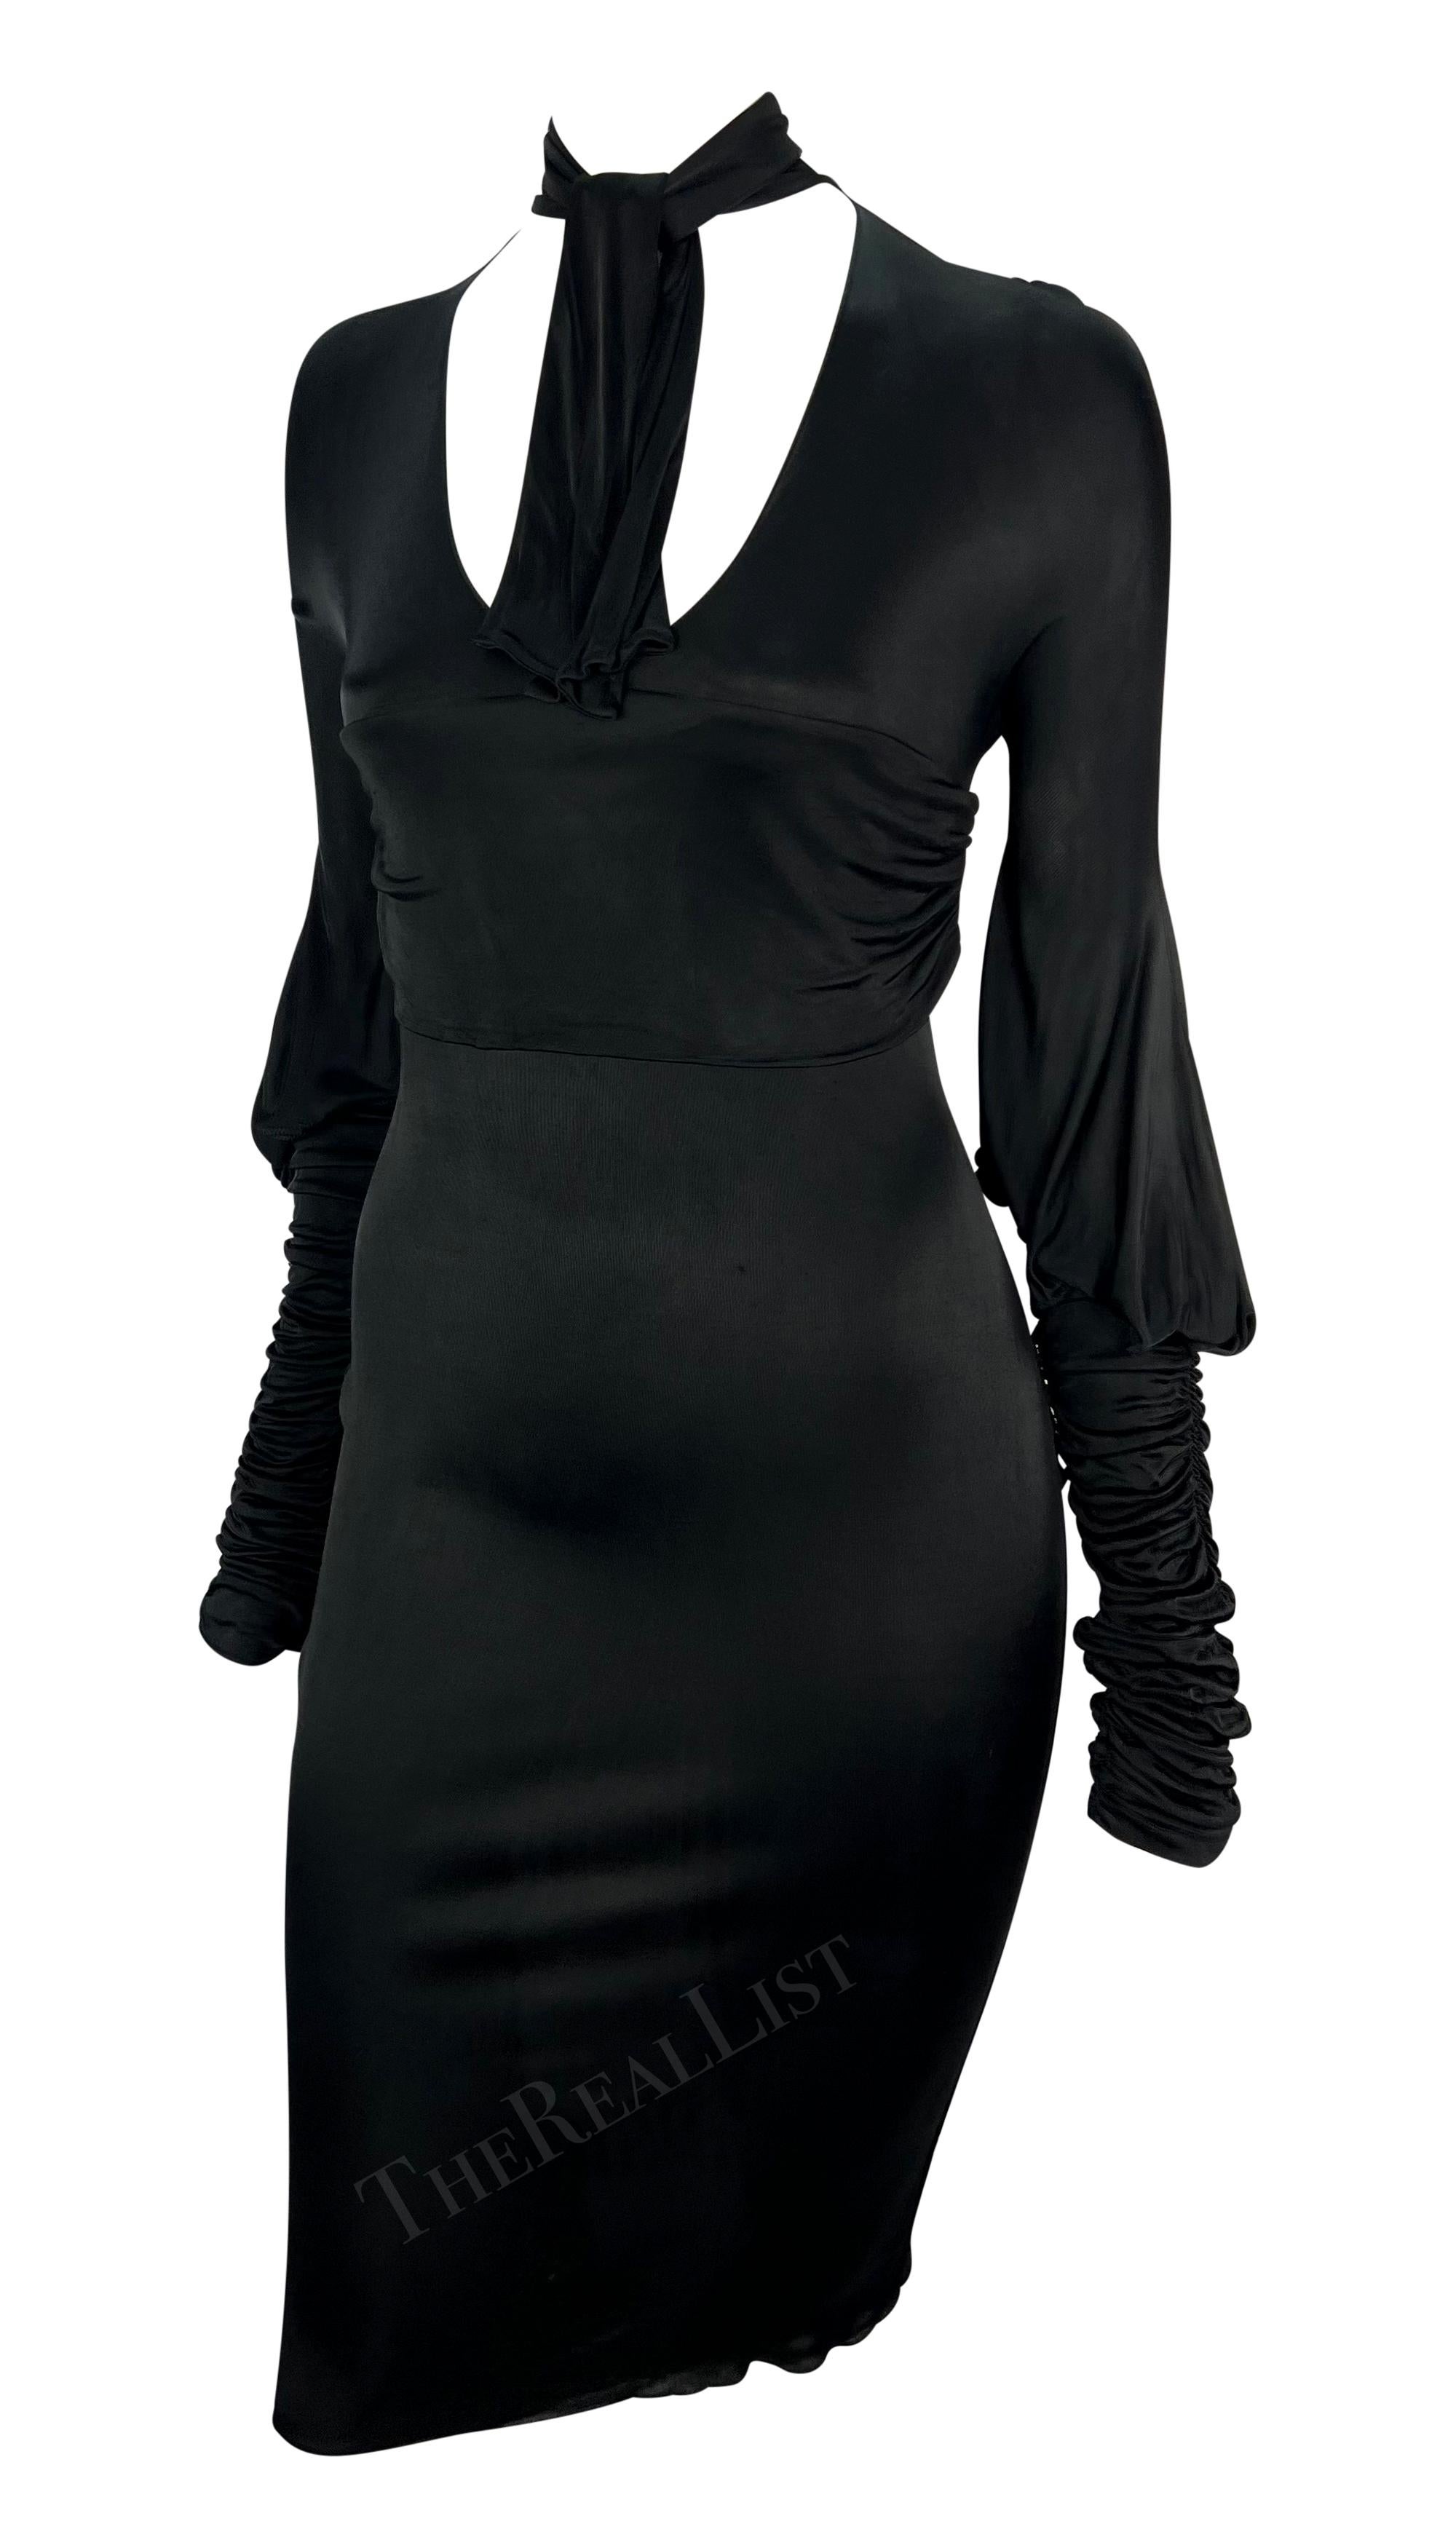 This black Gucci mini dress, designed by Tom Ford, is from the Fall/Winter 2003 collection. Made of stretch fabric, it features a deep v-neckline and a pussy cat bow. The long sleeves are ruched and fitted at the forearm, with fabric billowing at